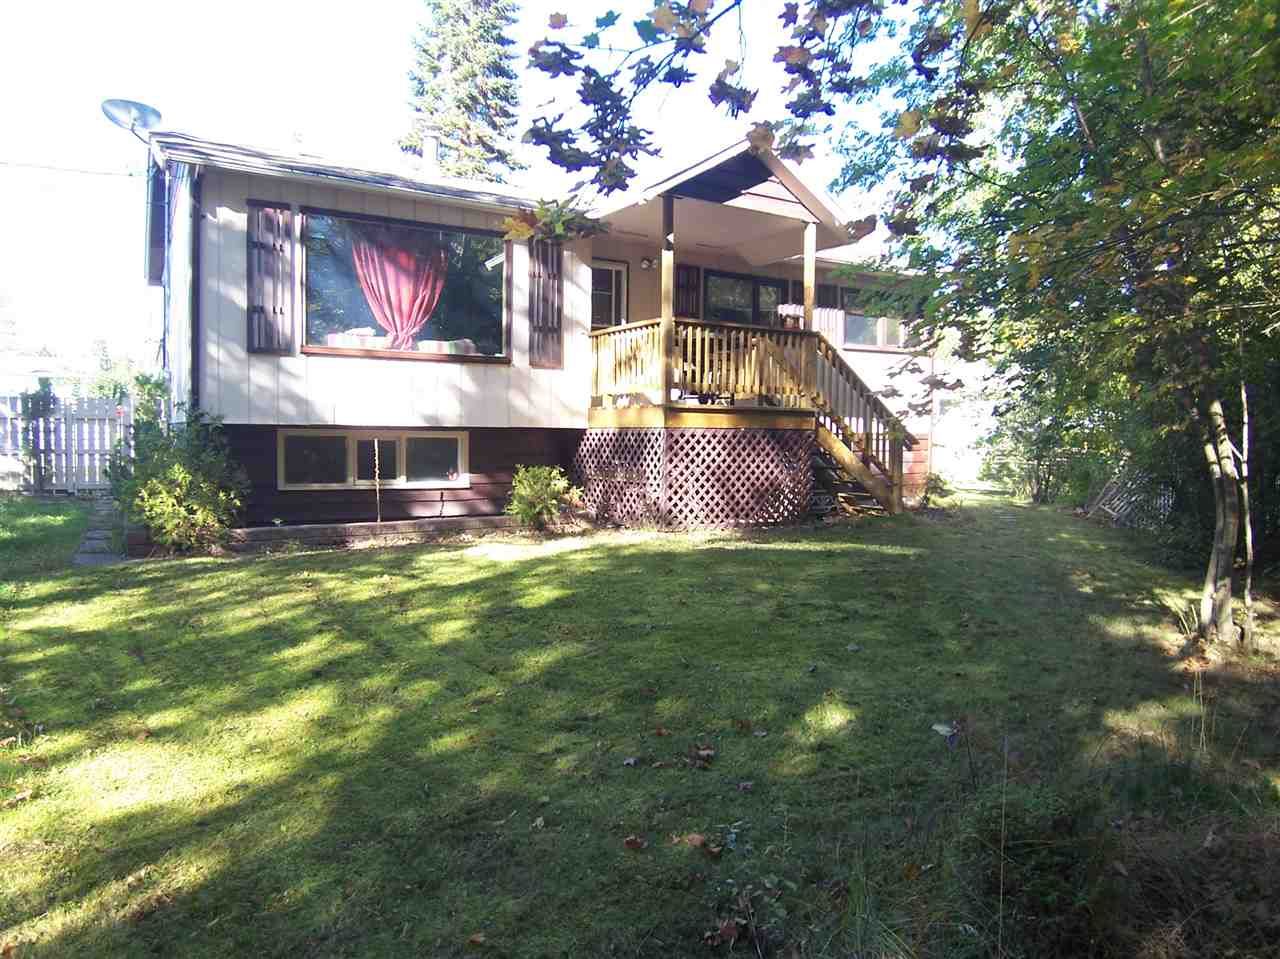 Main Photo: 731 BEAUBIEN Avenue in Quesnel: Quesnel - Town House for sale (Quesnel (Zone 28))  : MLS®# R2109317